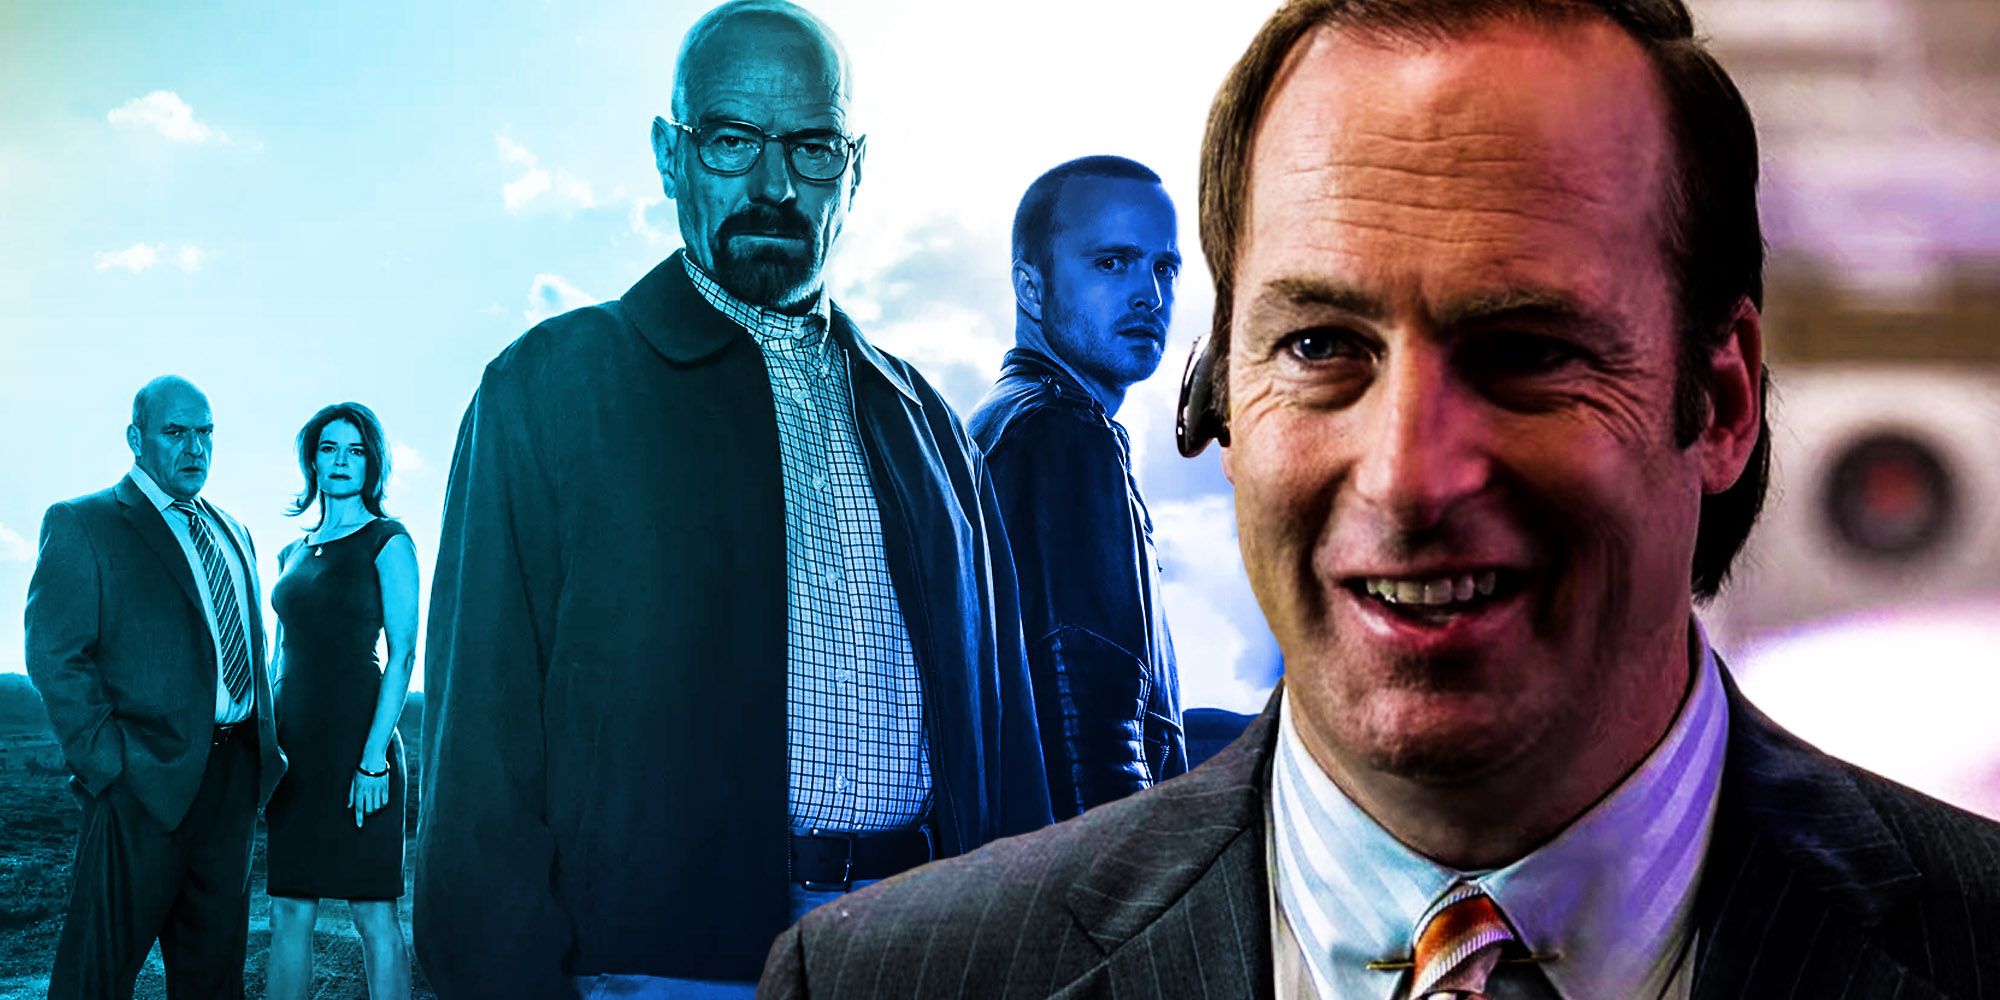 Saul Goodman smiling and the cast of Breaking Bad